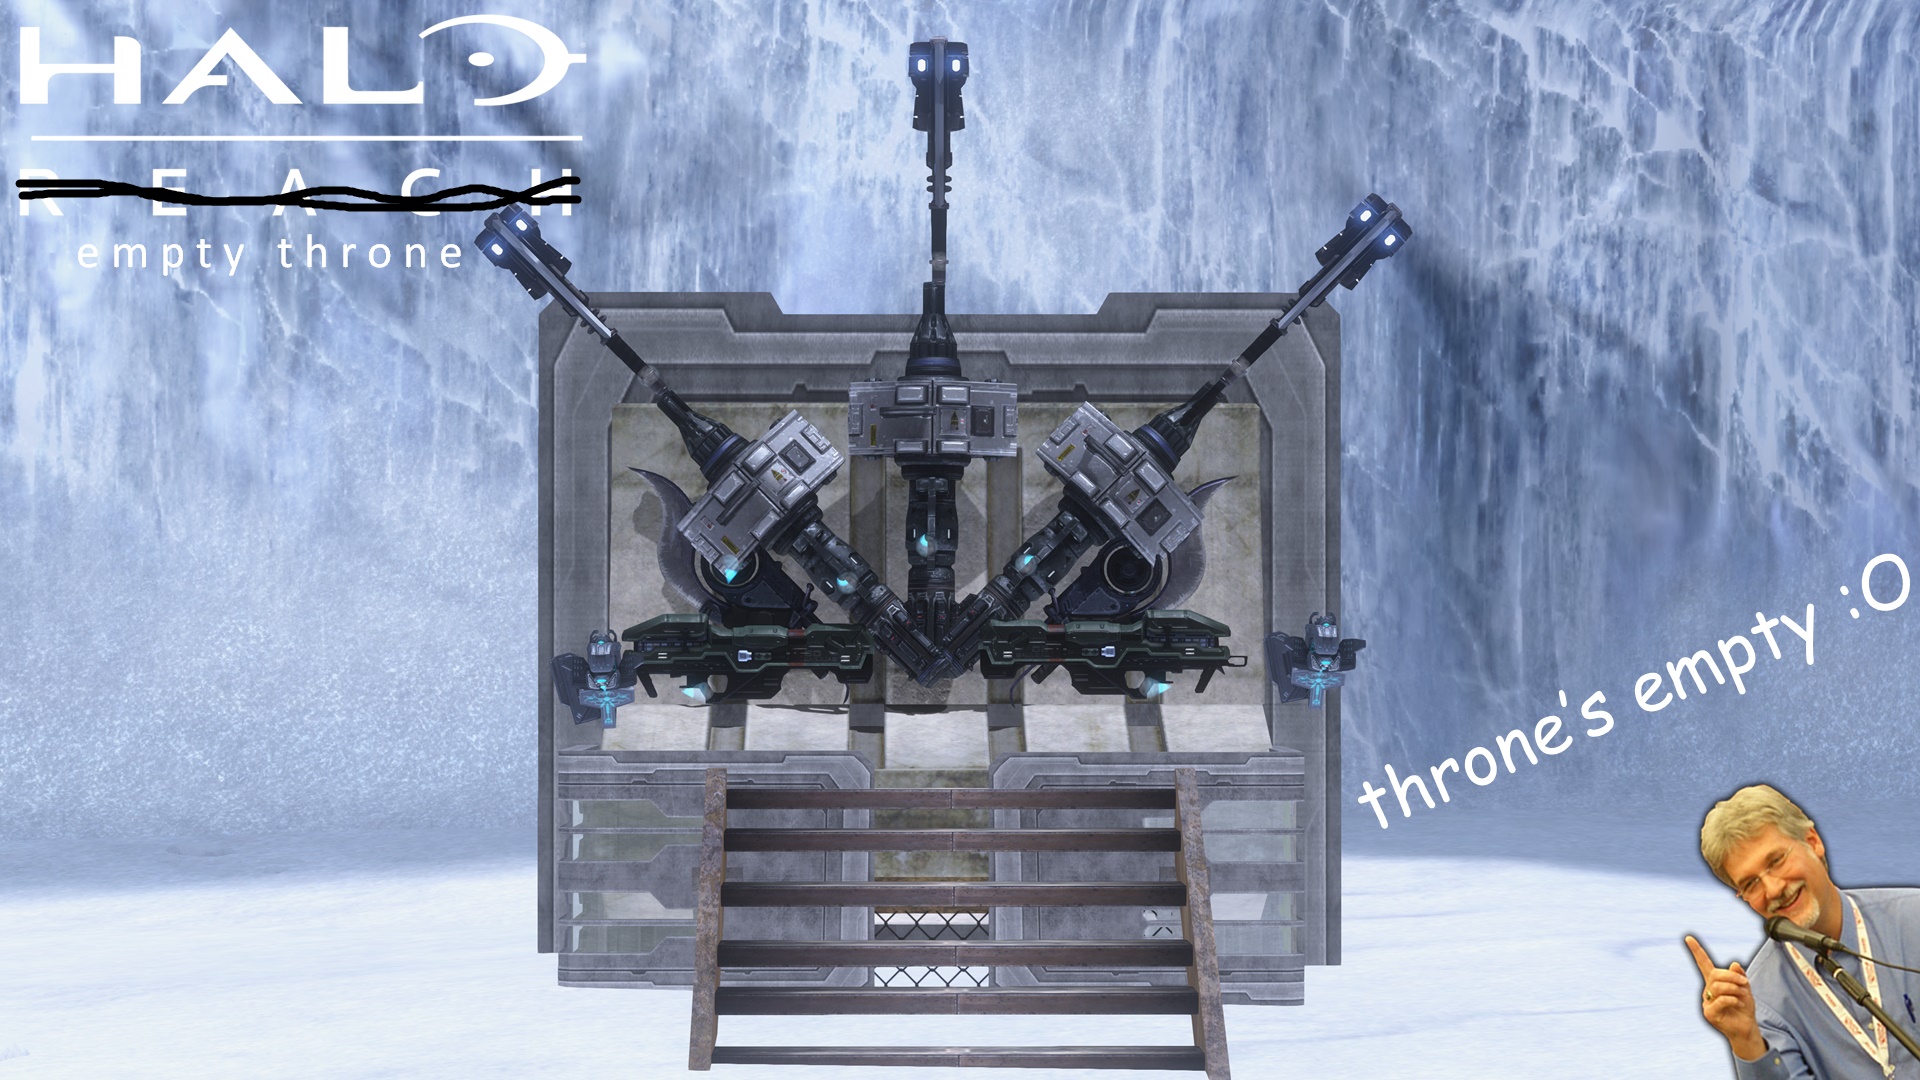 Mock cover of Halo: Empty Throne depicting a "chair" made on the Halo 3 map Avalanche with the Halo: Reach title crossed out and "Empty Throne" written beneath it in Comic Sans font along with Troy Denning in the bottom-right pointing at text that reads "throne's empty"